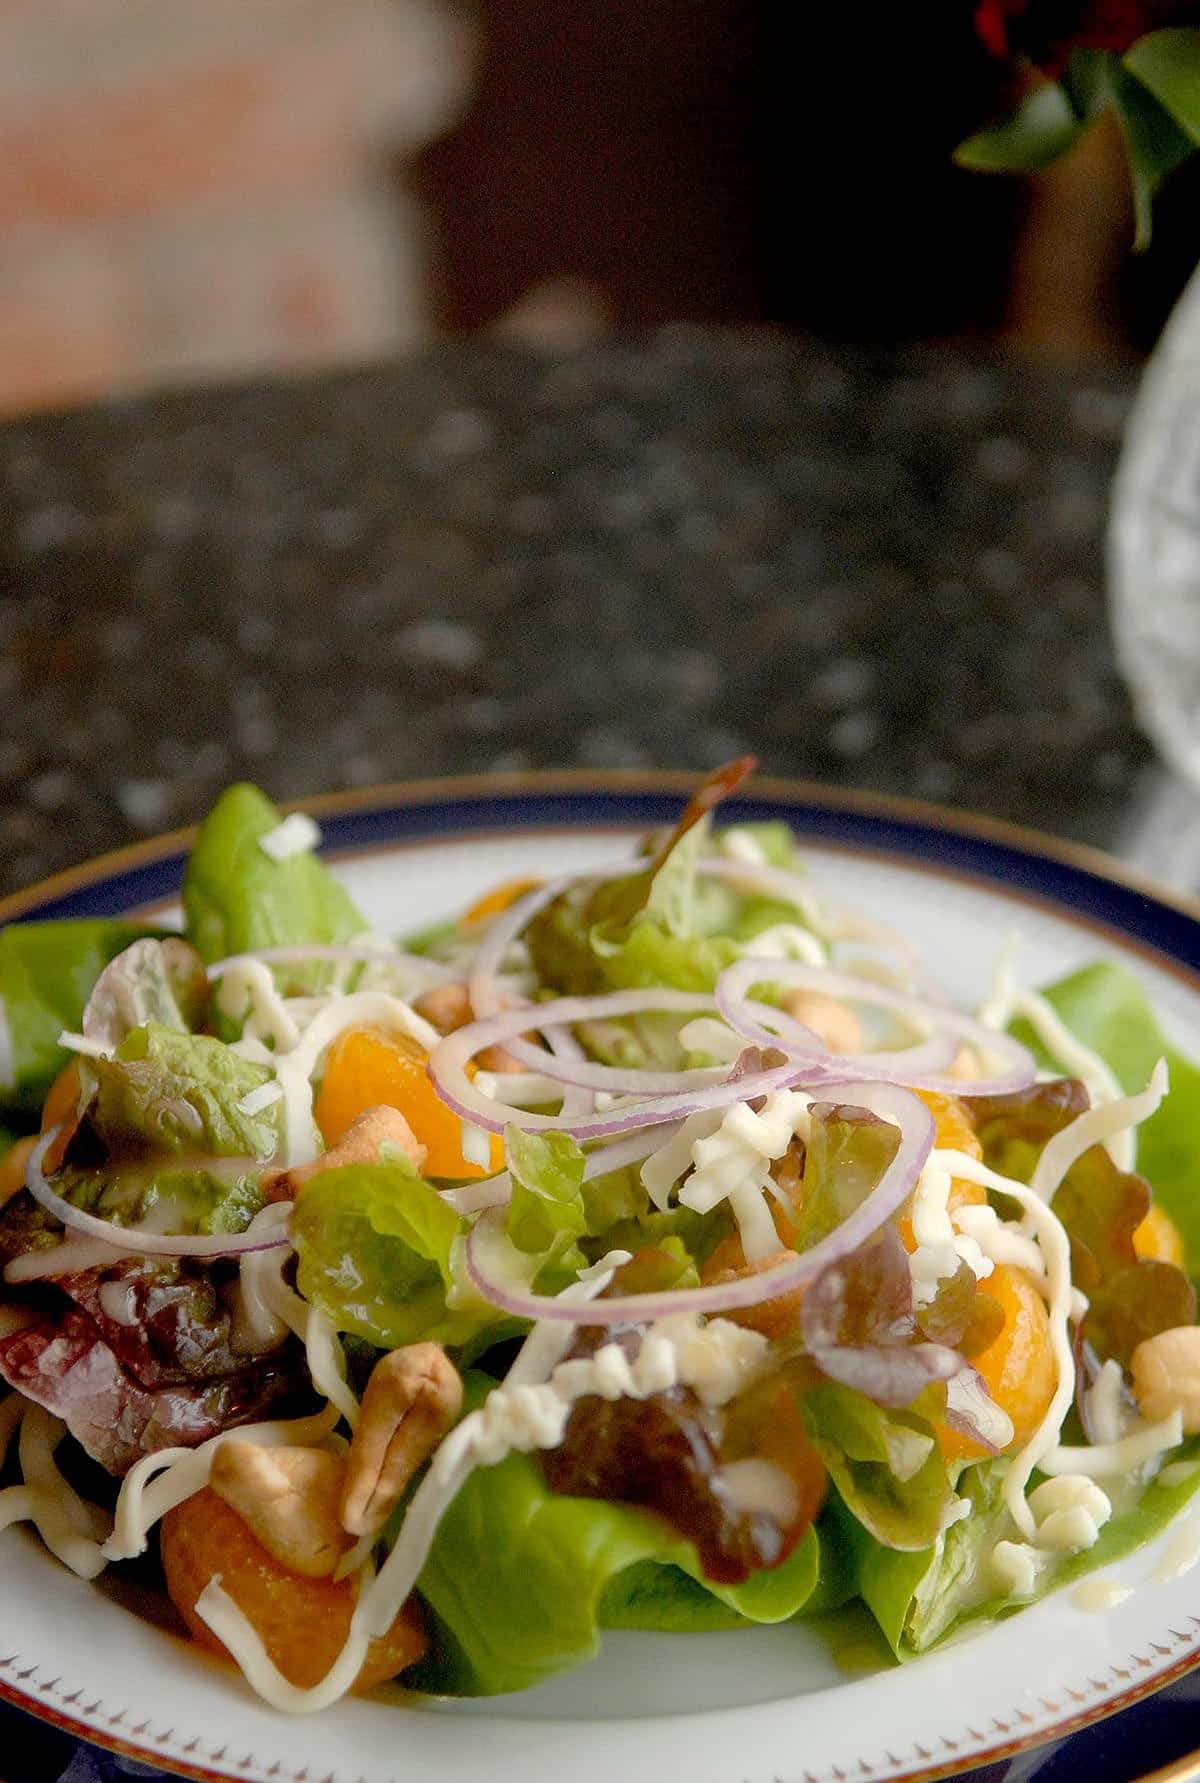  Crisp and refreshing, this salad is perfect for summer days